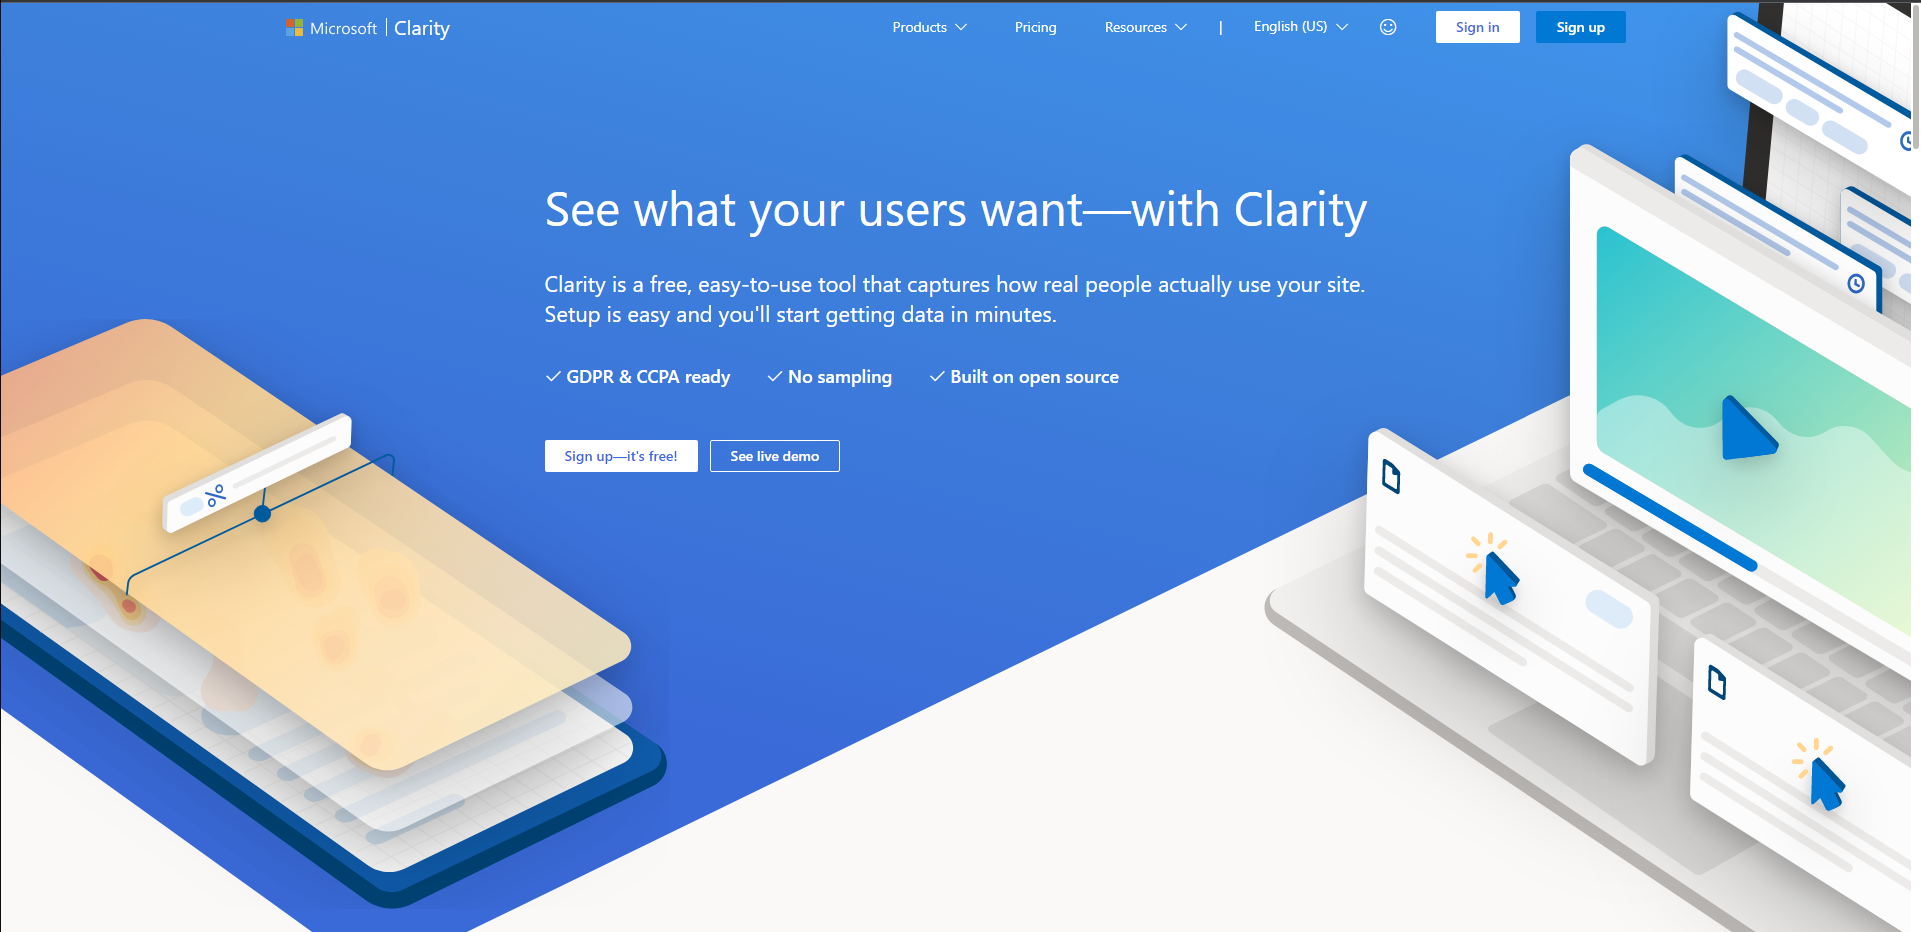 Microsoft Clarity - Free Forever 